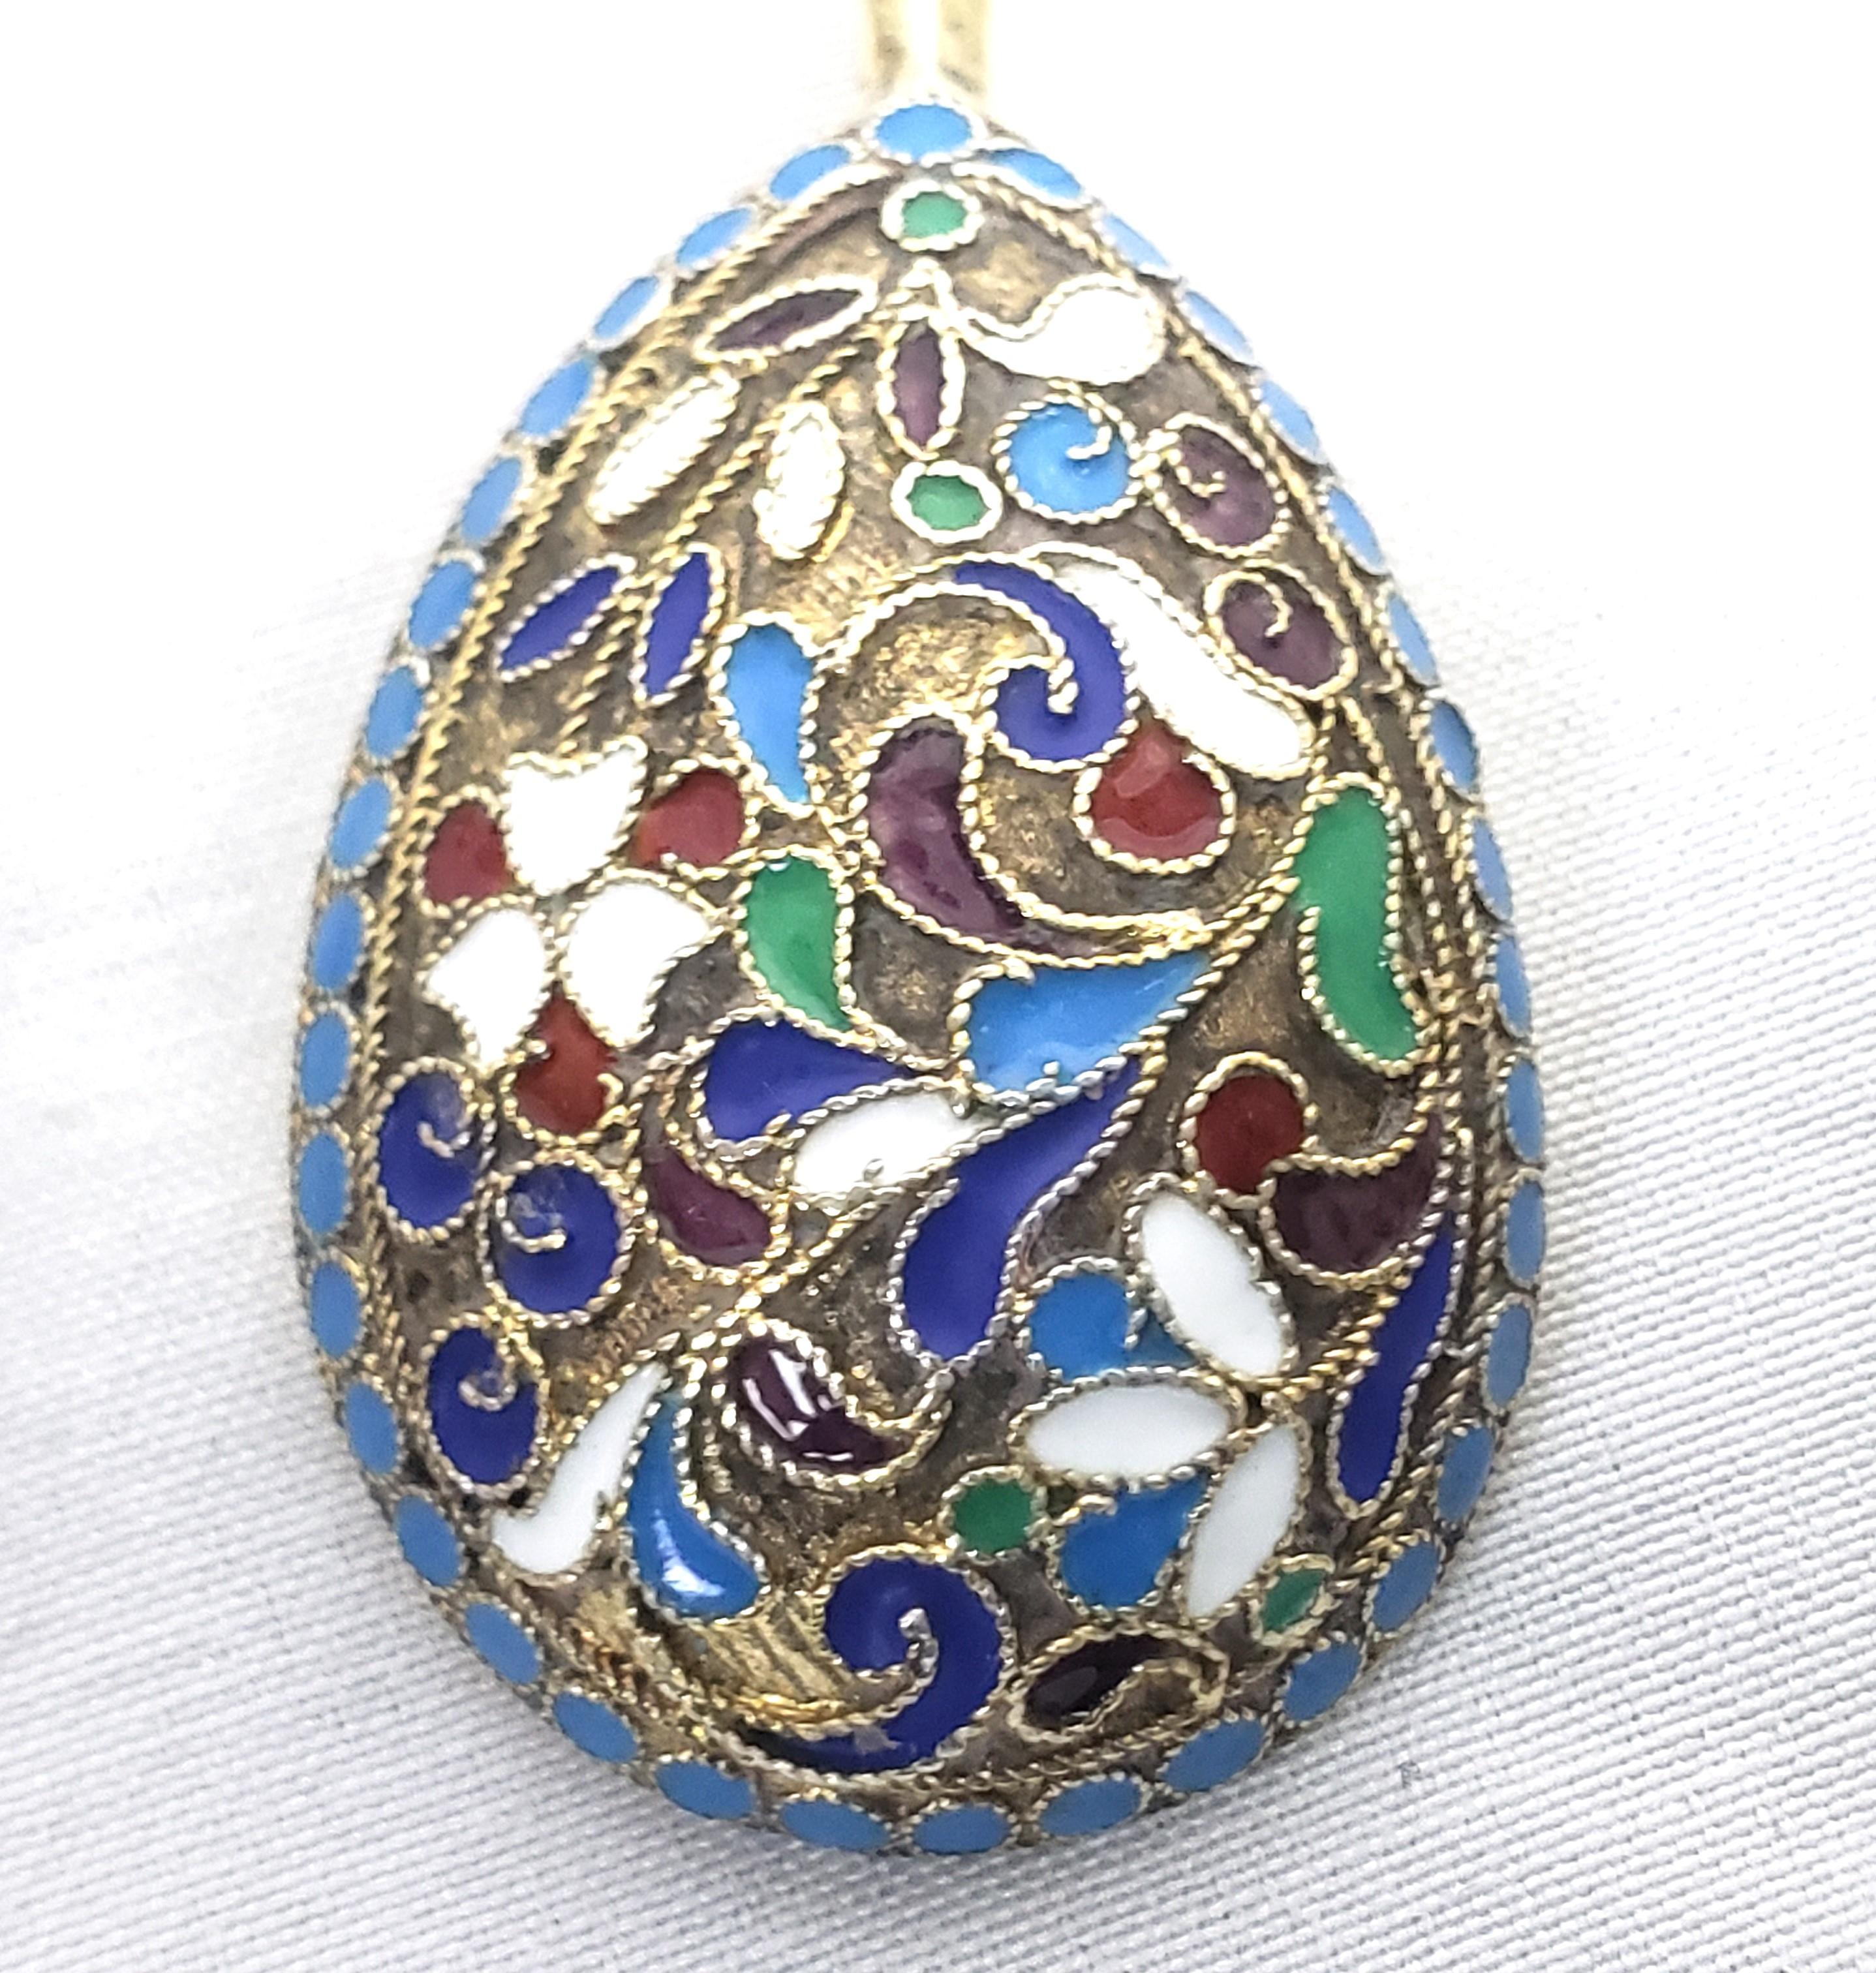 Antique Russian Silver & Enamel Spoon Set with Ornate Floral Motif For Sale 3